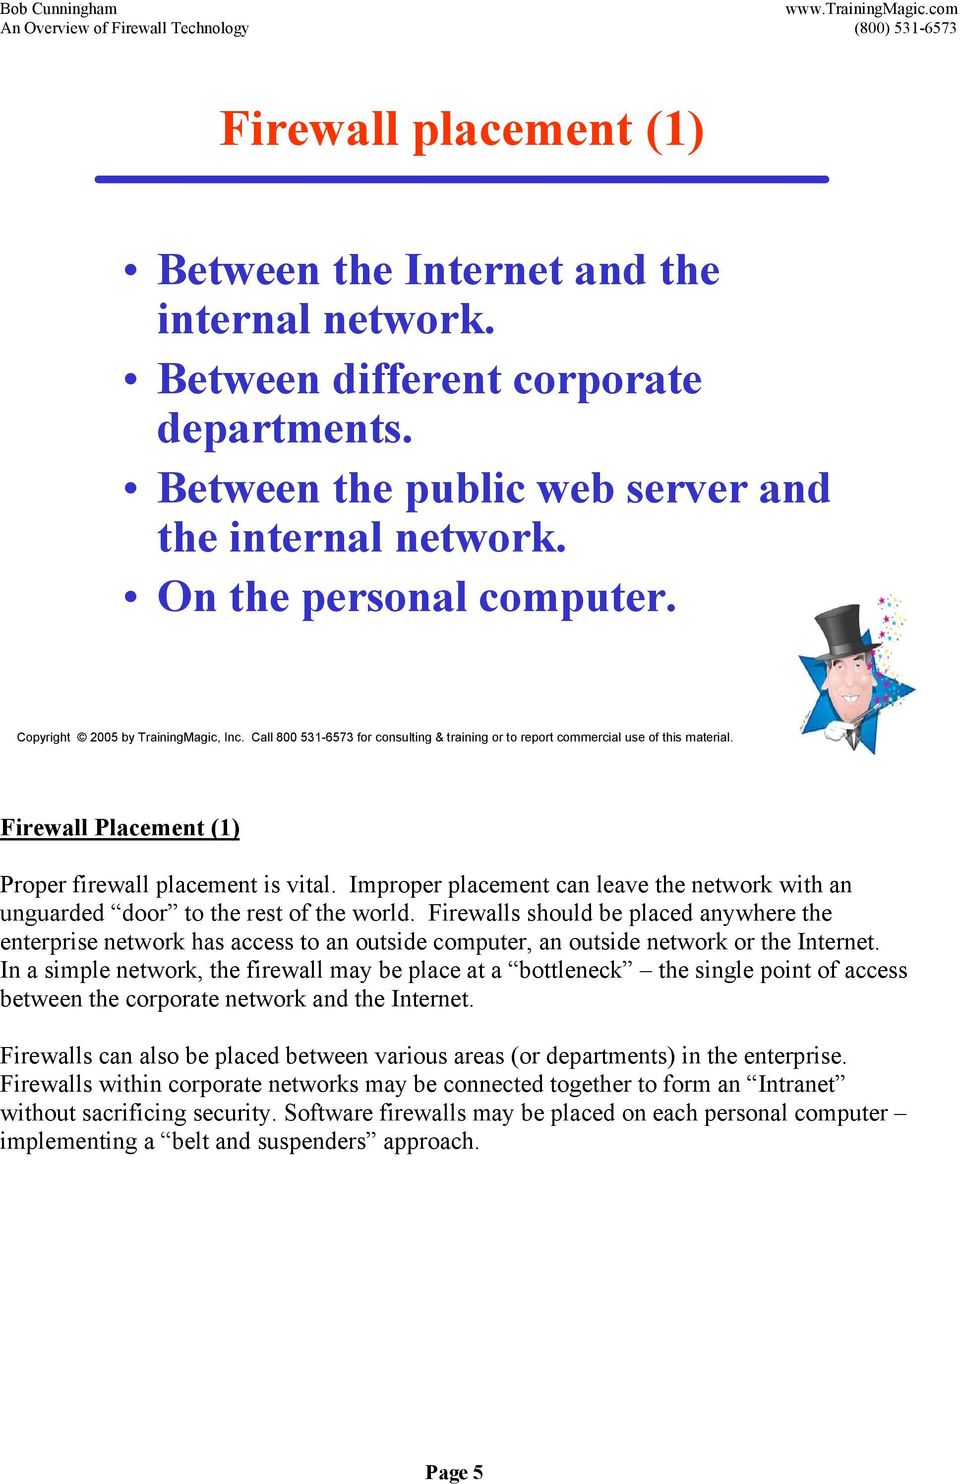 Firewalls should be placed anywhere the enterprise network has access to an outside computer, an outside network or the Internet.